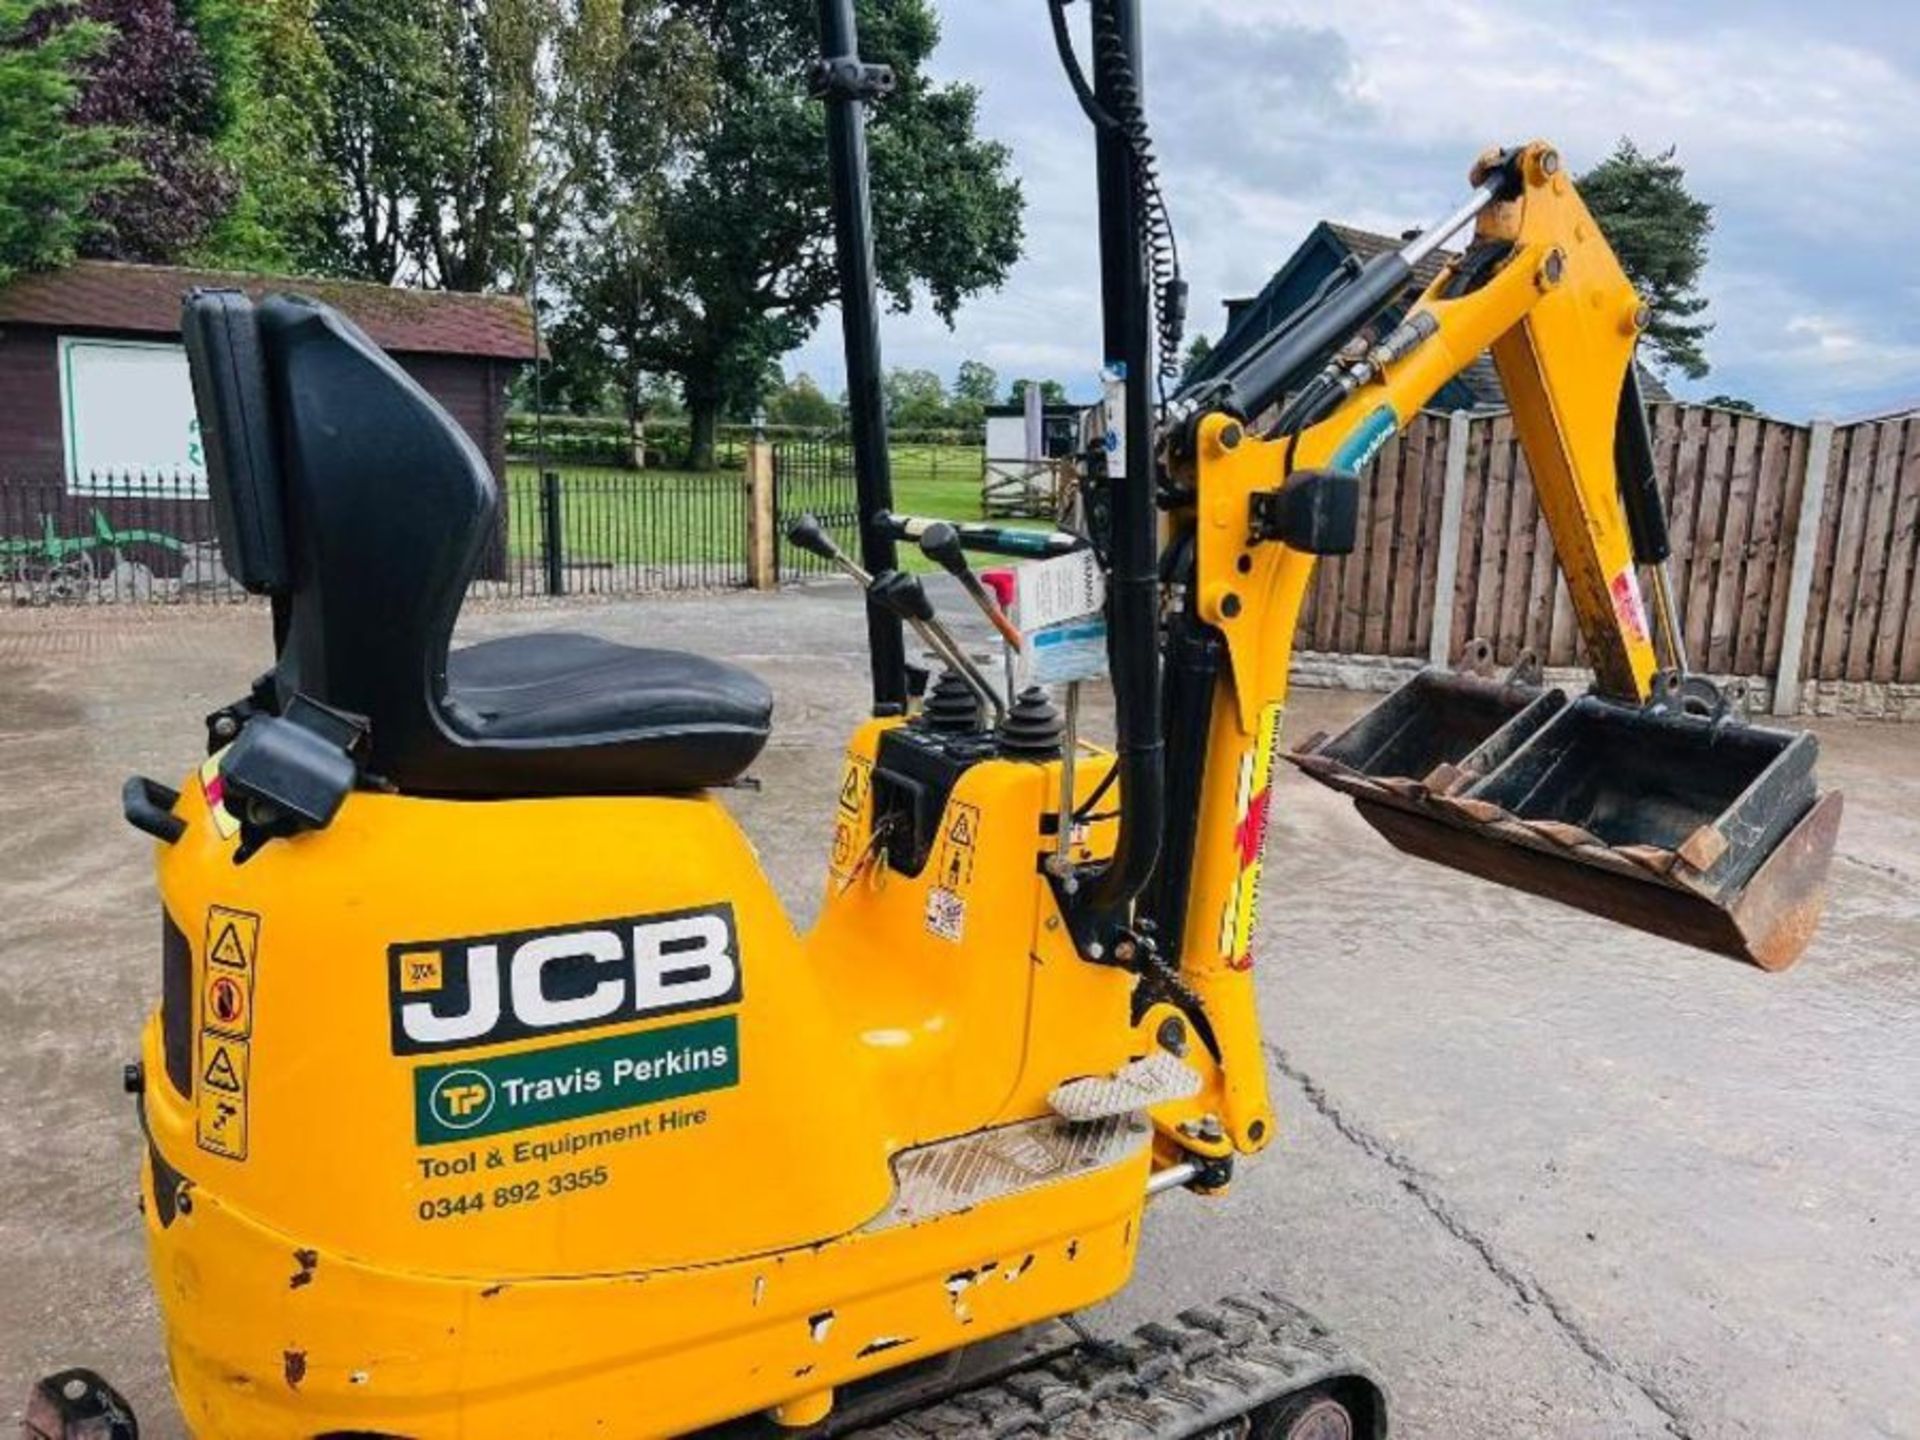 JCB MICRO DIGGER *YEAR 2019, ONLY 338 HOURS* C/W EXPANDING TRACKS  - Image 13 of 16